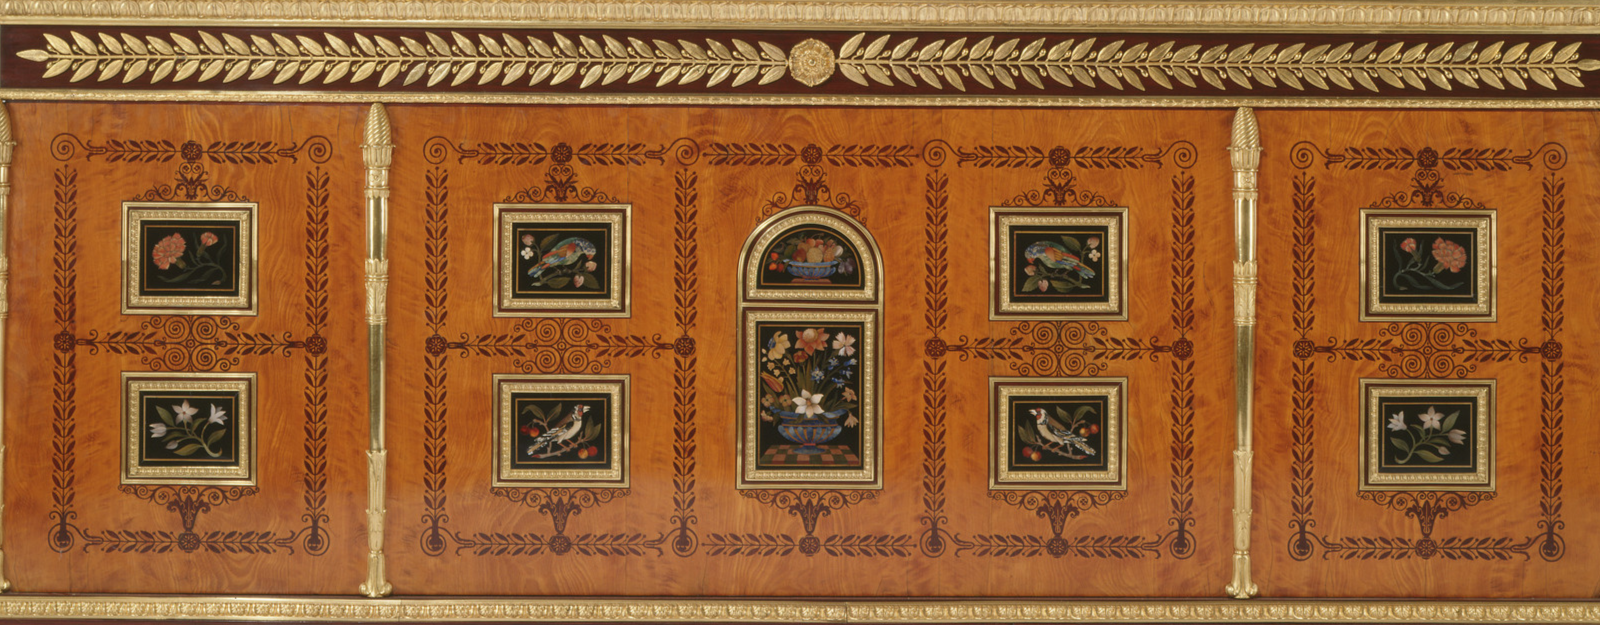 close up of wooden cabinet decorated with inlaid flowers and birds